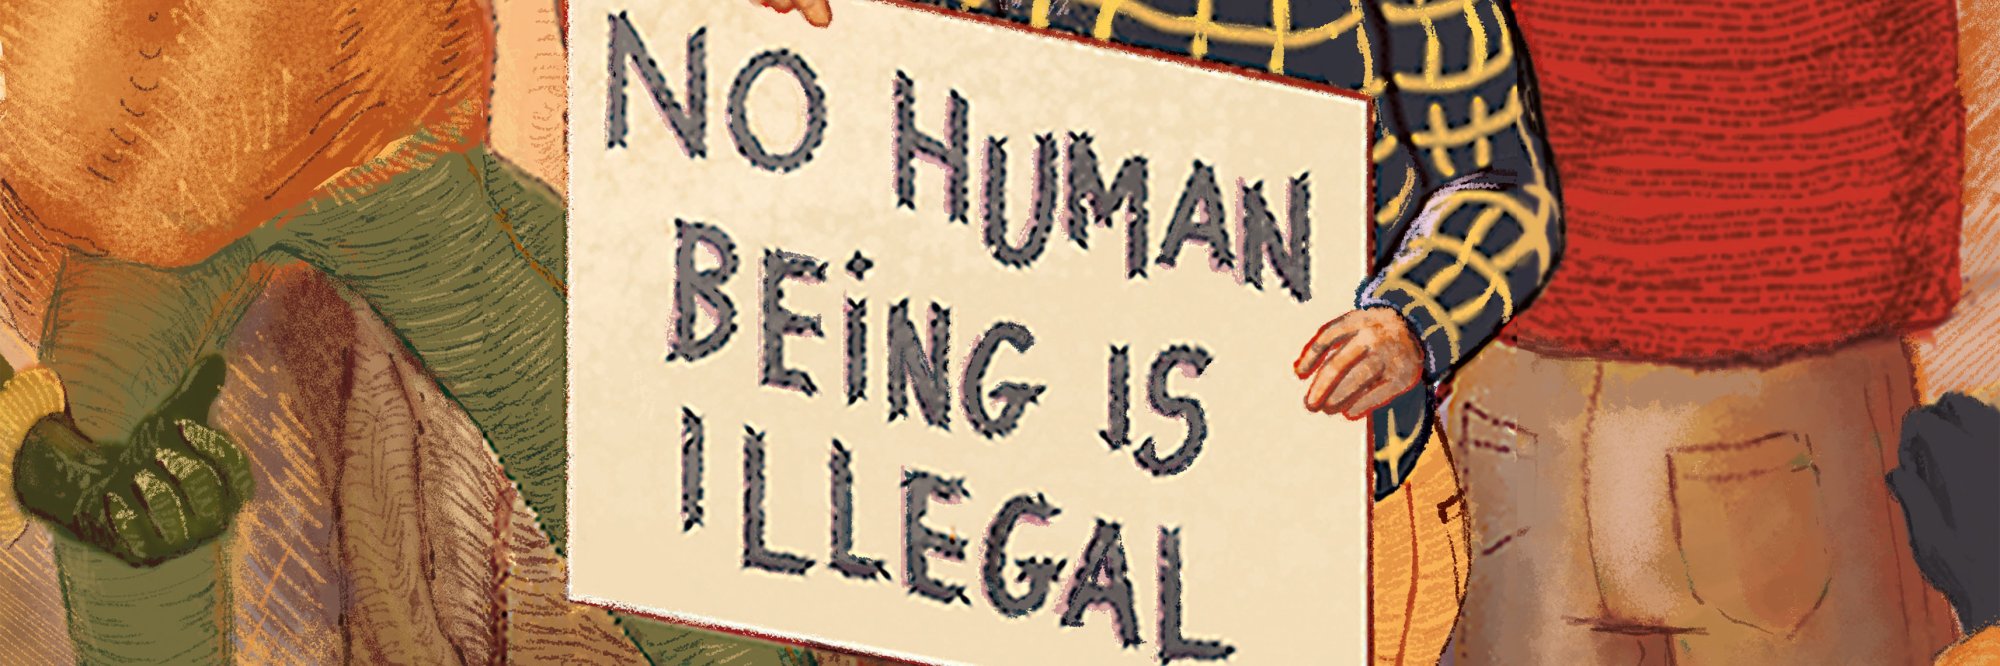 No human being is illegal banner